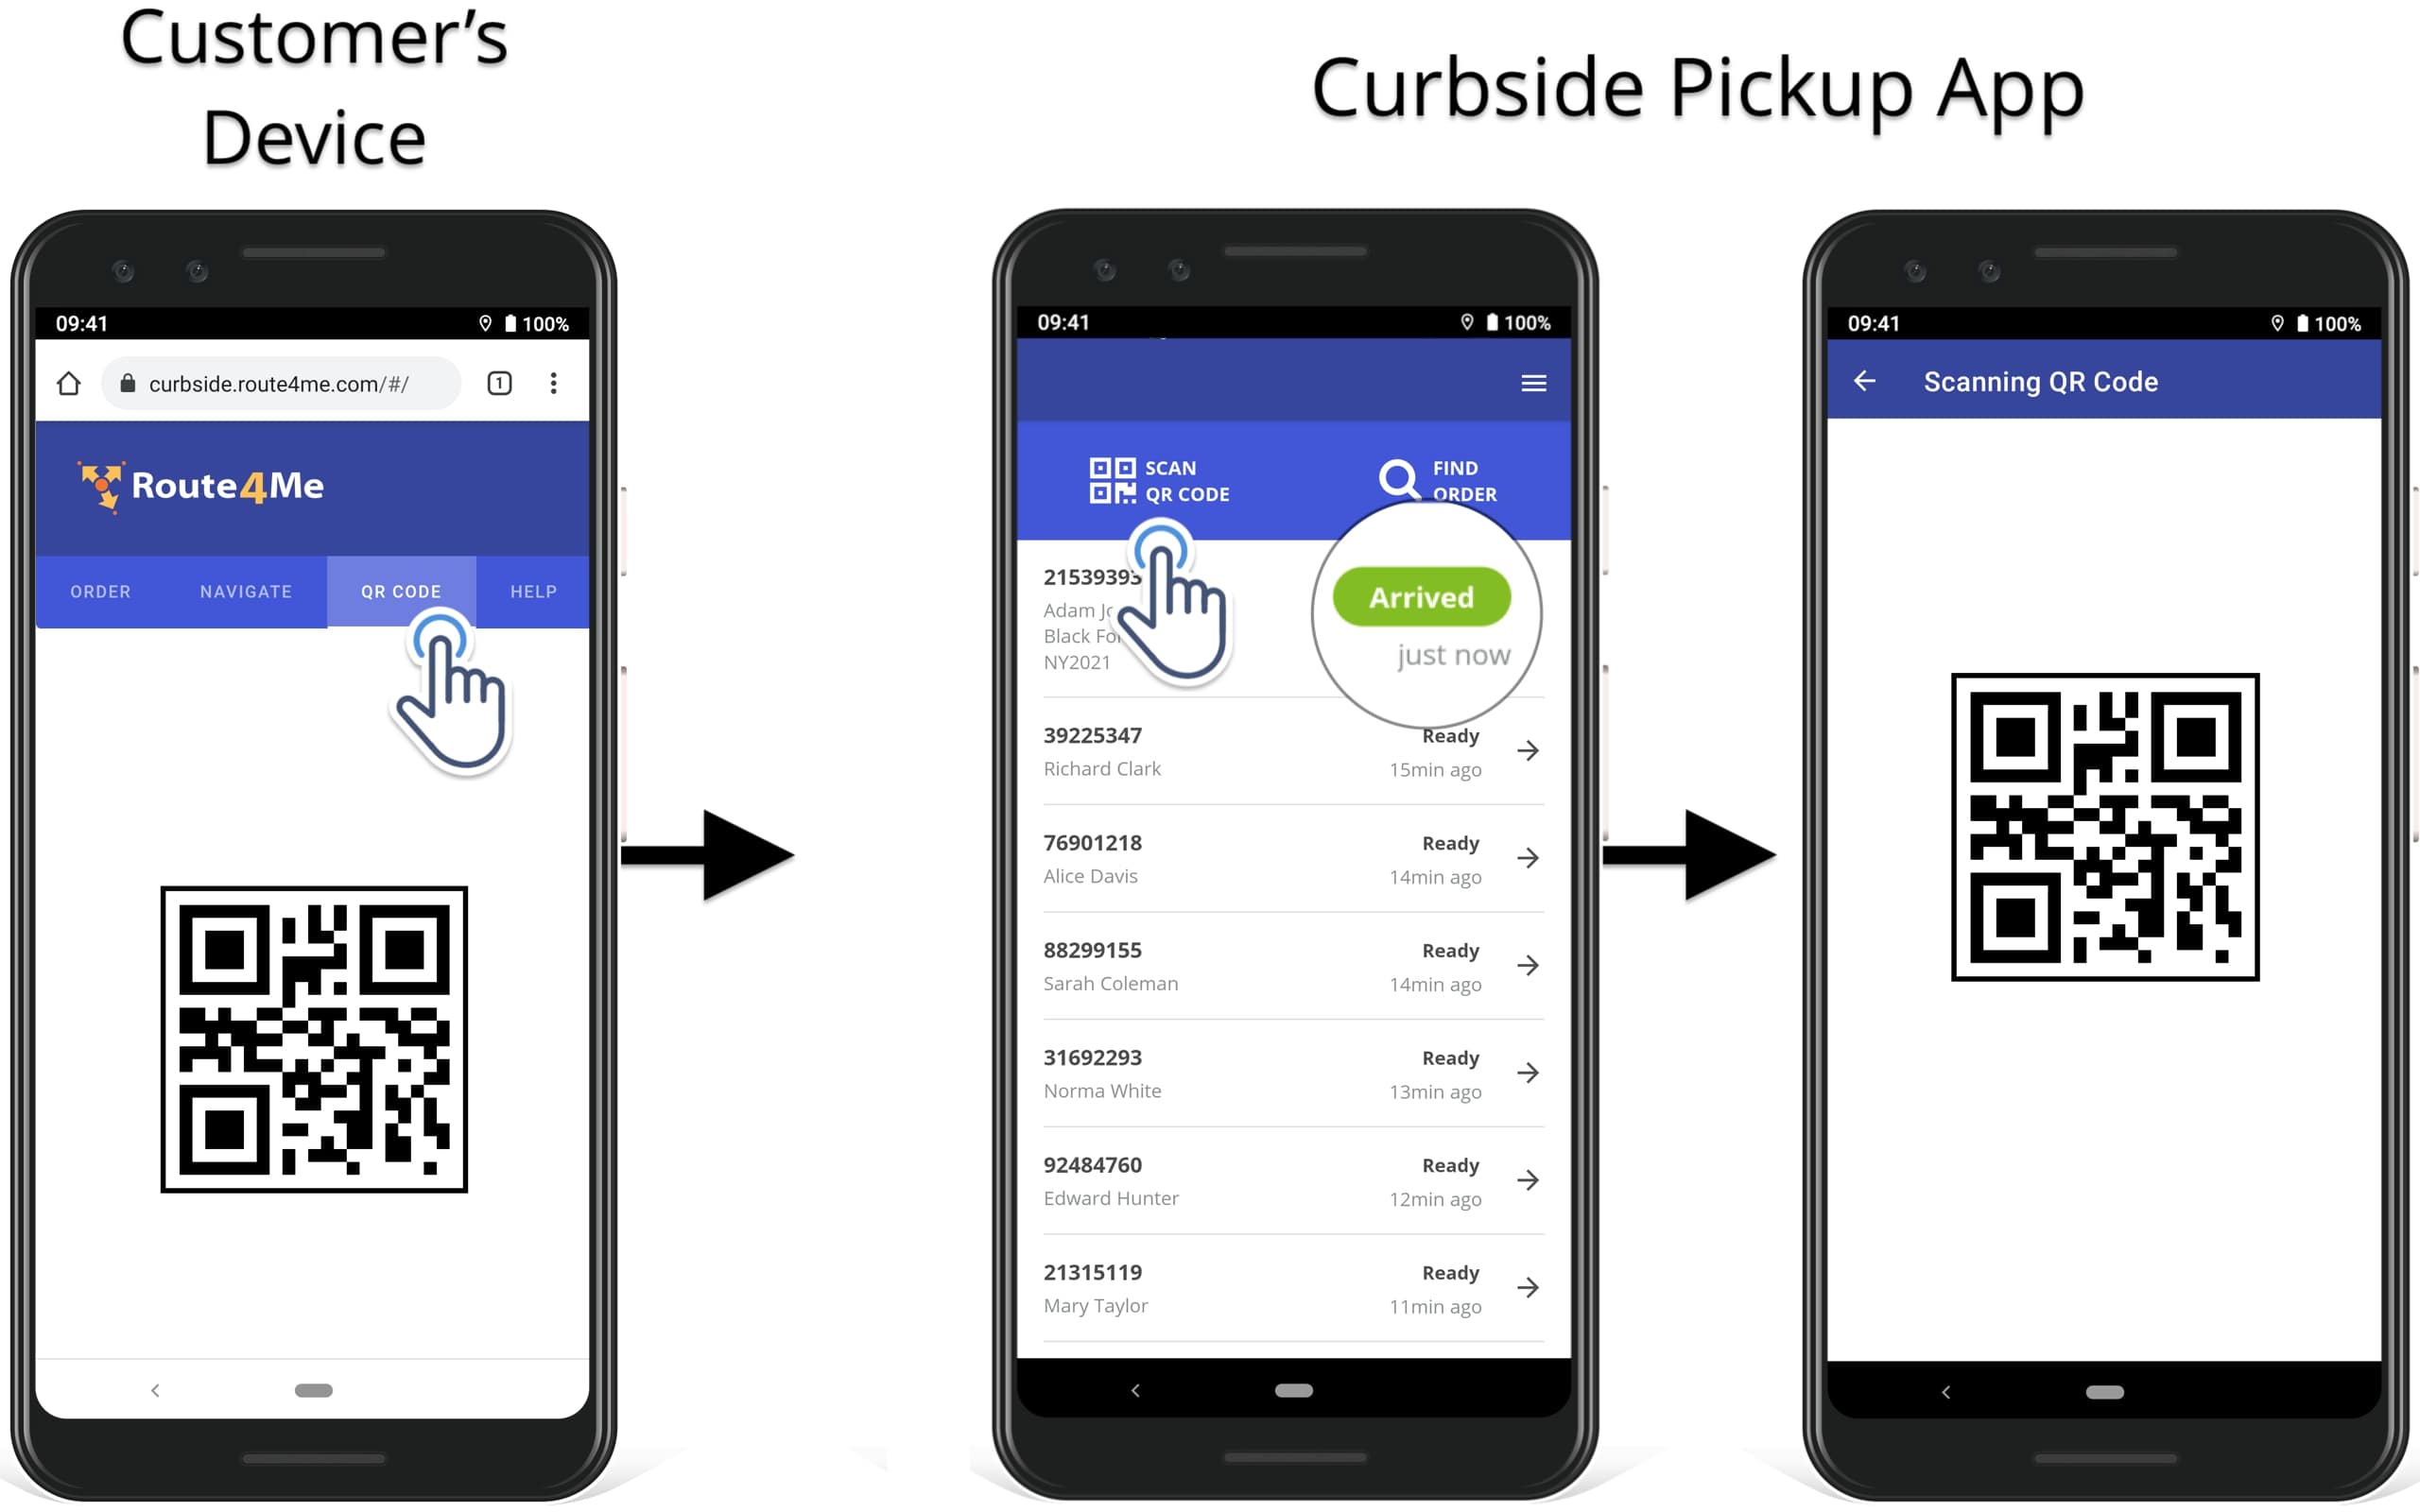 Curbside pickup app with QR code scanner and curbside pickup order tracking portal for customers.